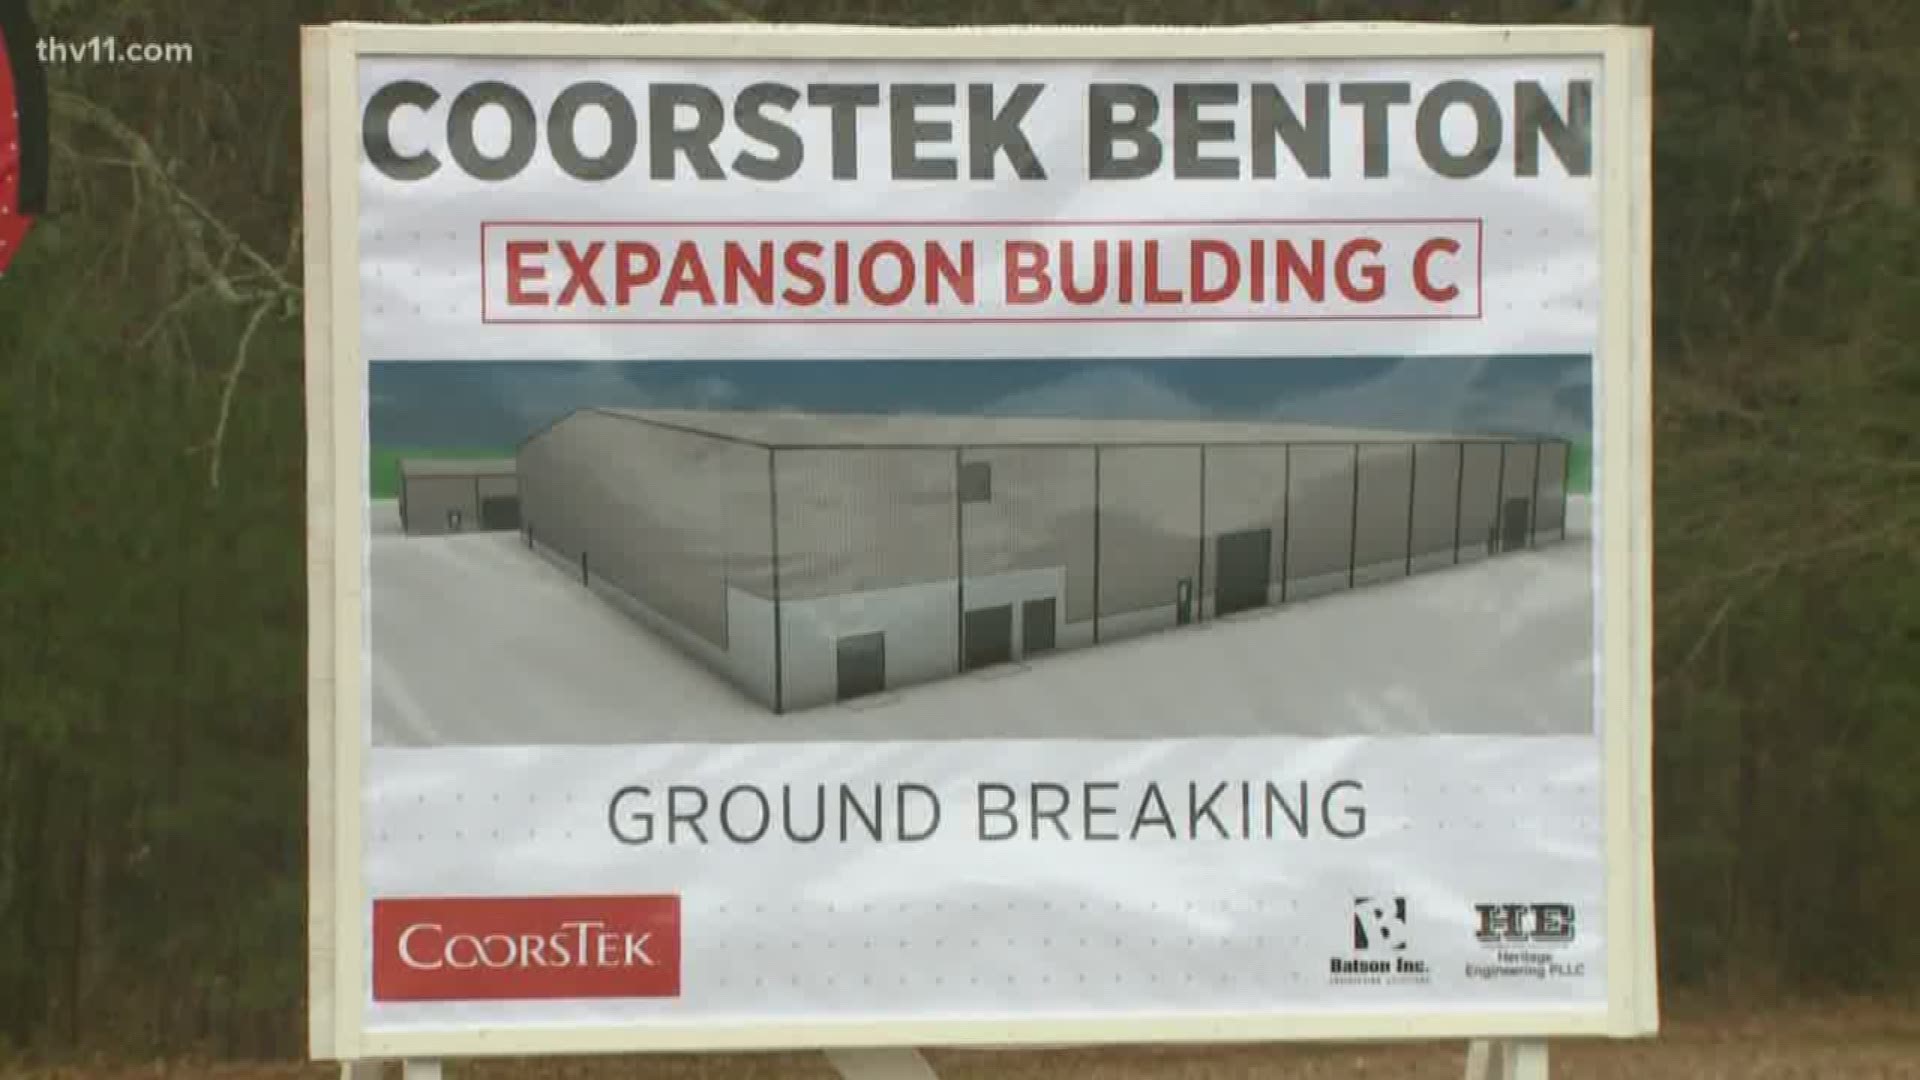 New jobs are coming to the Benton area.